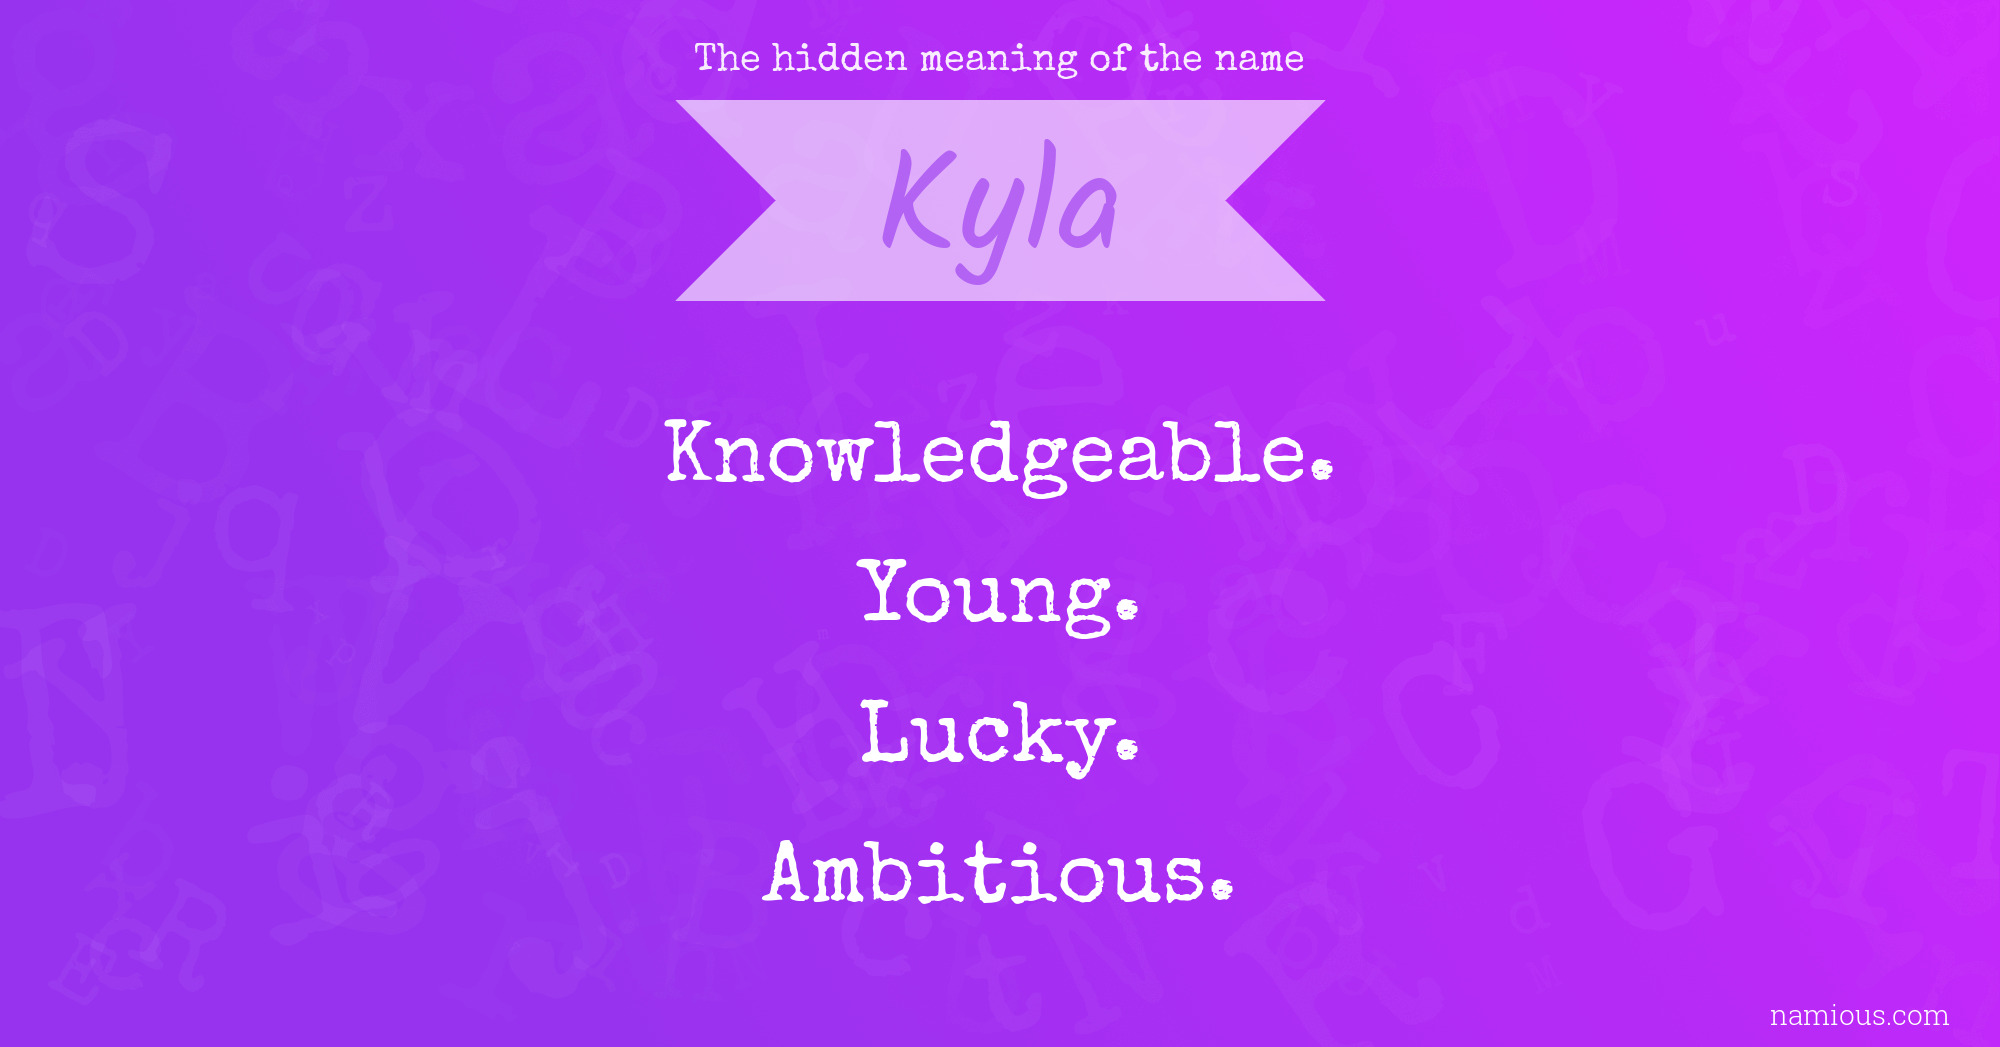 The hidden meaning of the name Kyla